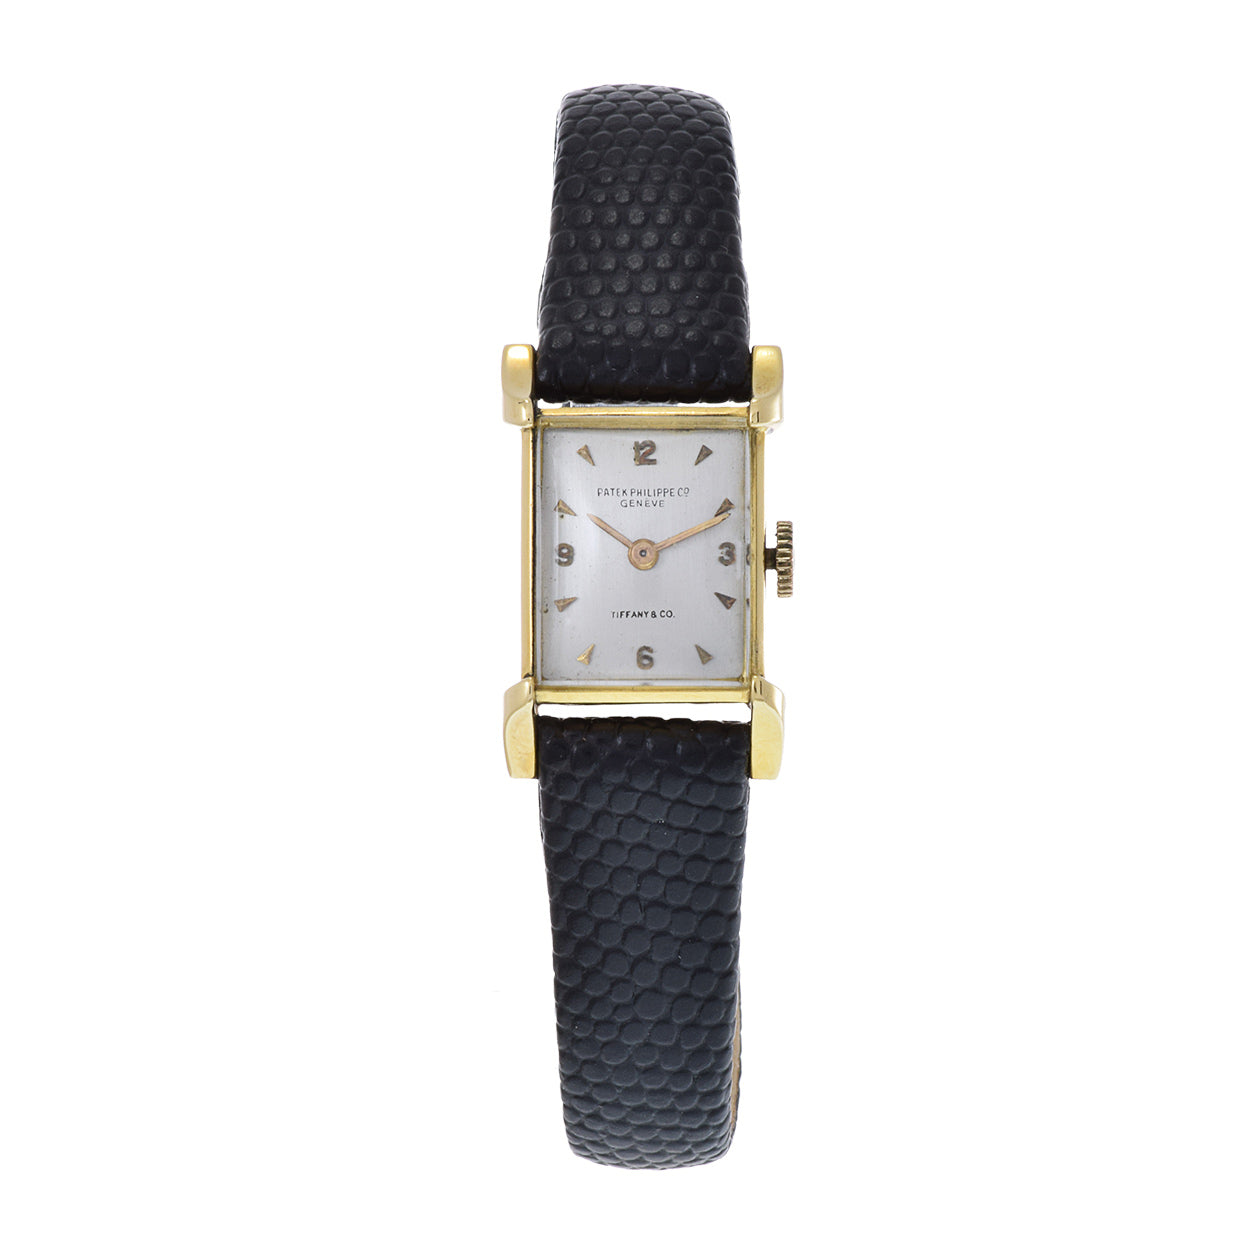 Vintage 1957 Patek Philippe  REF. 2280, 18KT Yellow gold Retailed By Tiffany & Co.